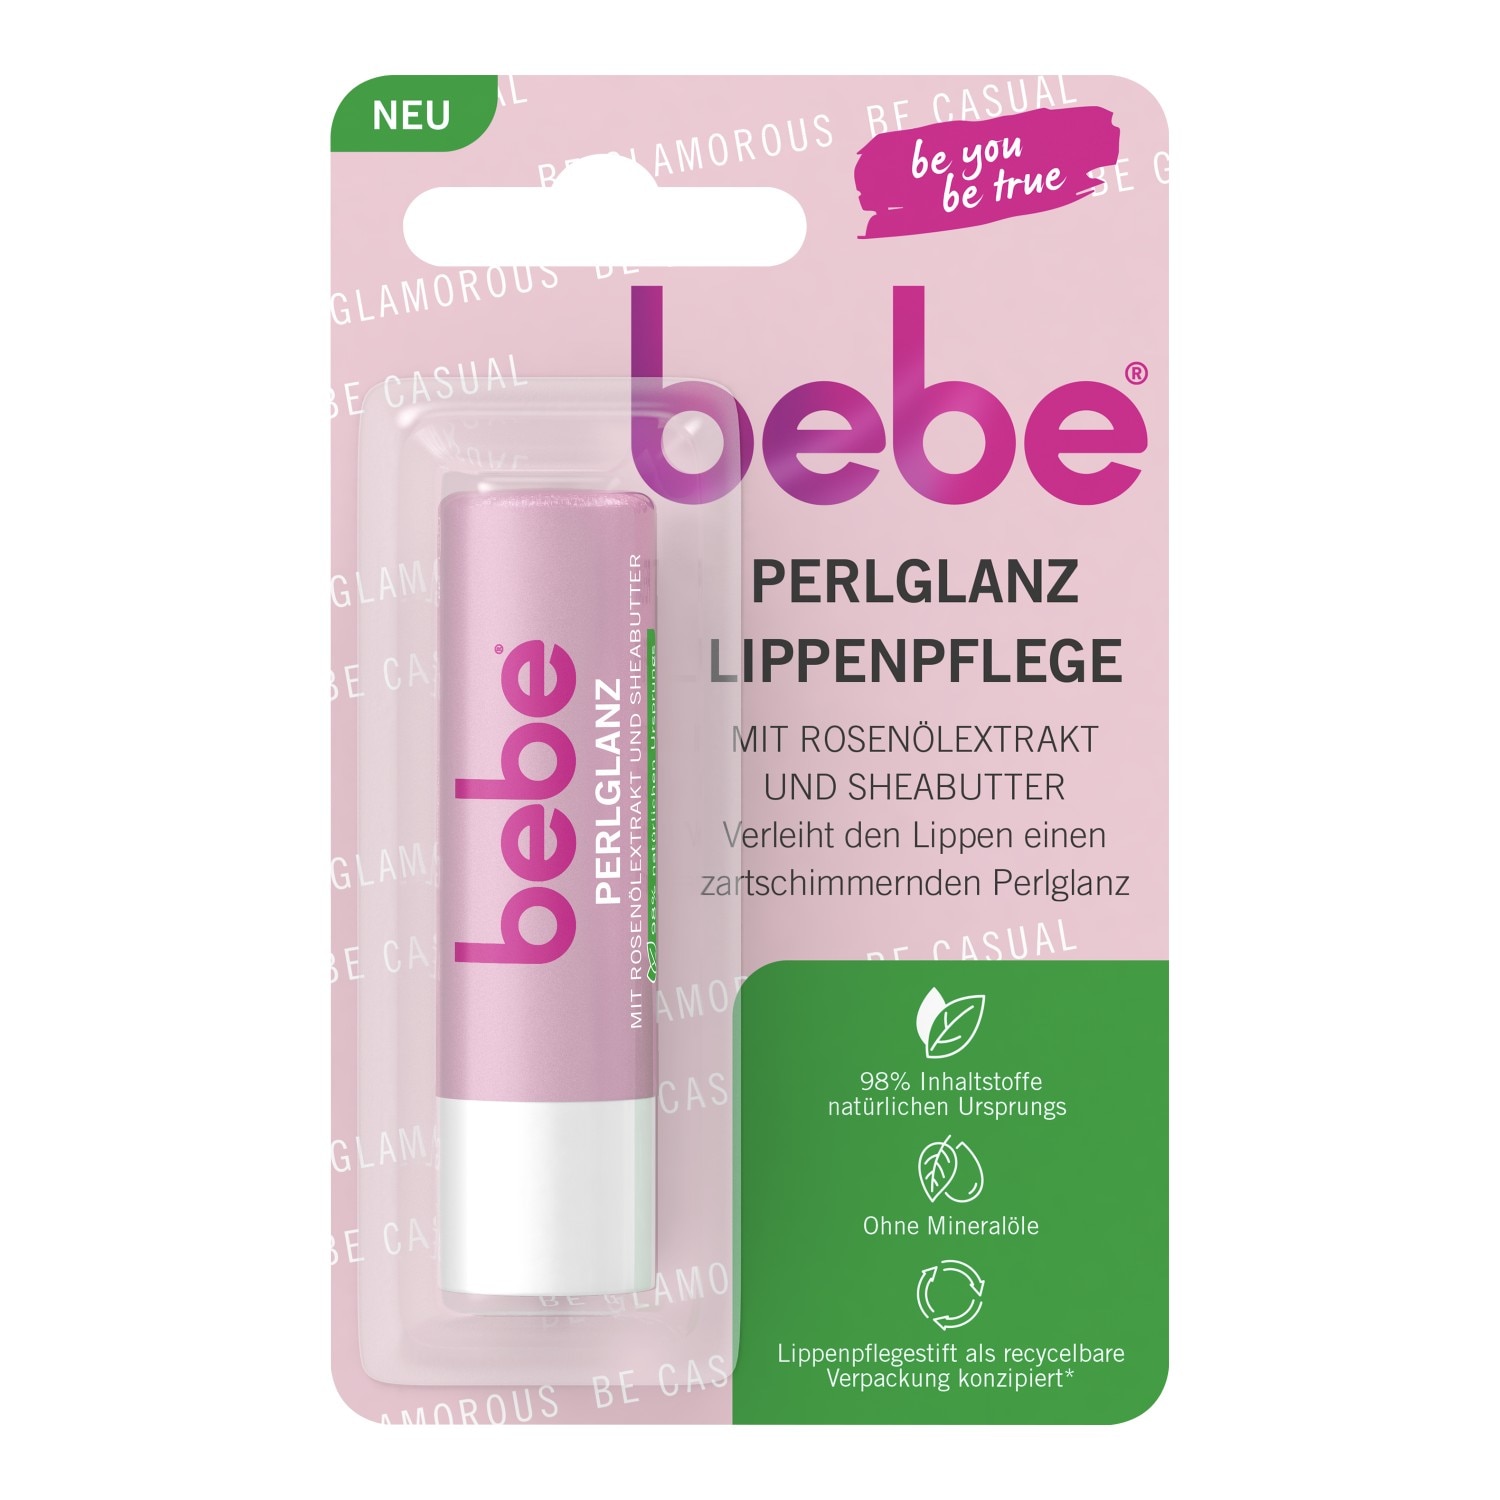 bebe Pearlescent lip care with rose oil extract